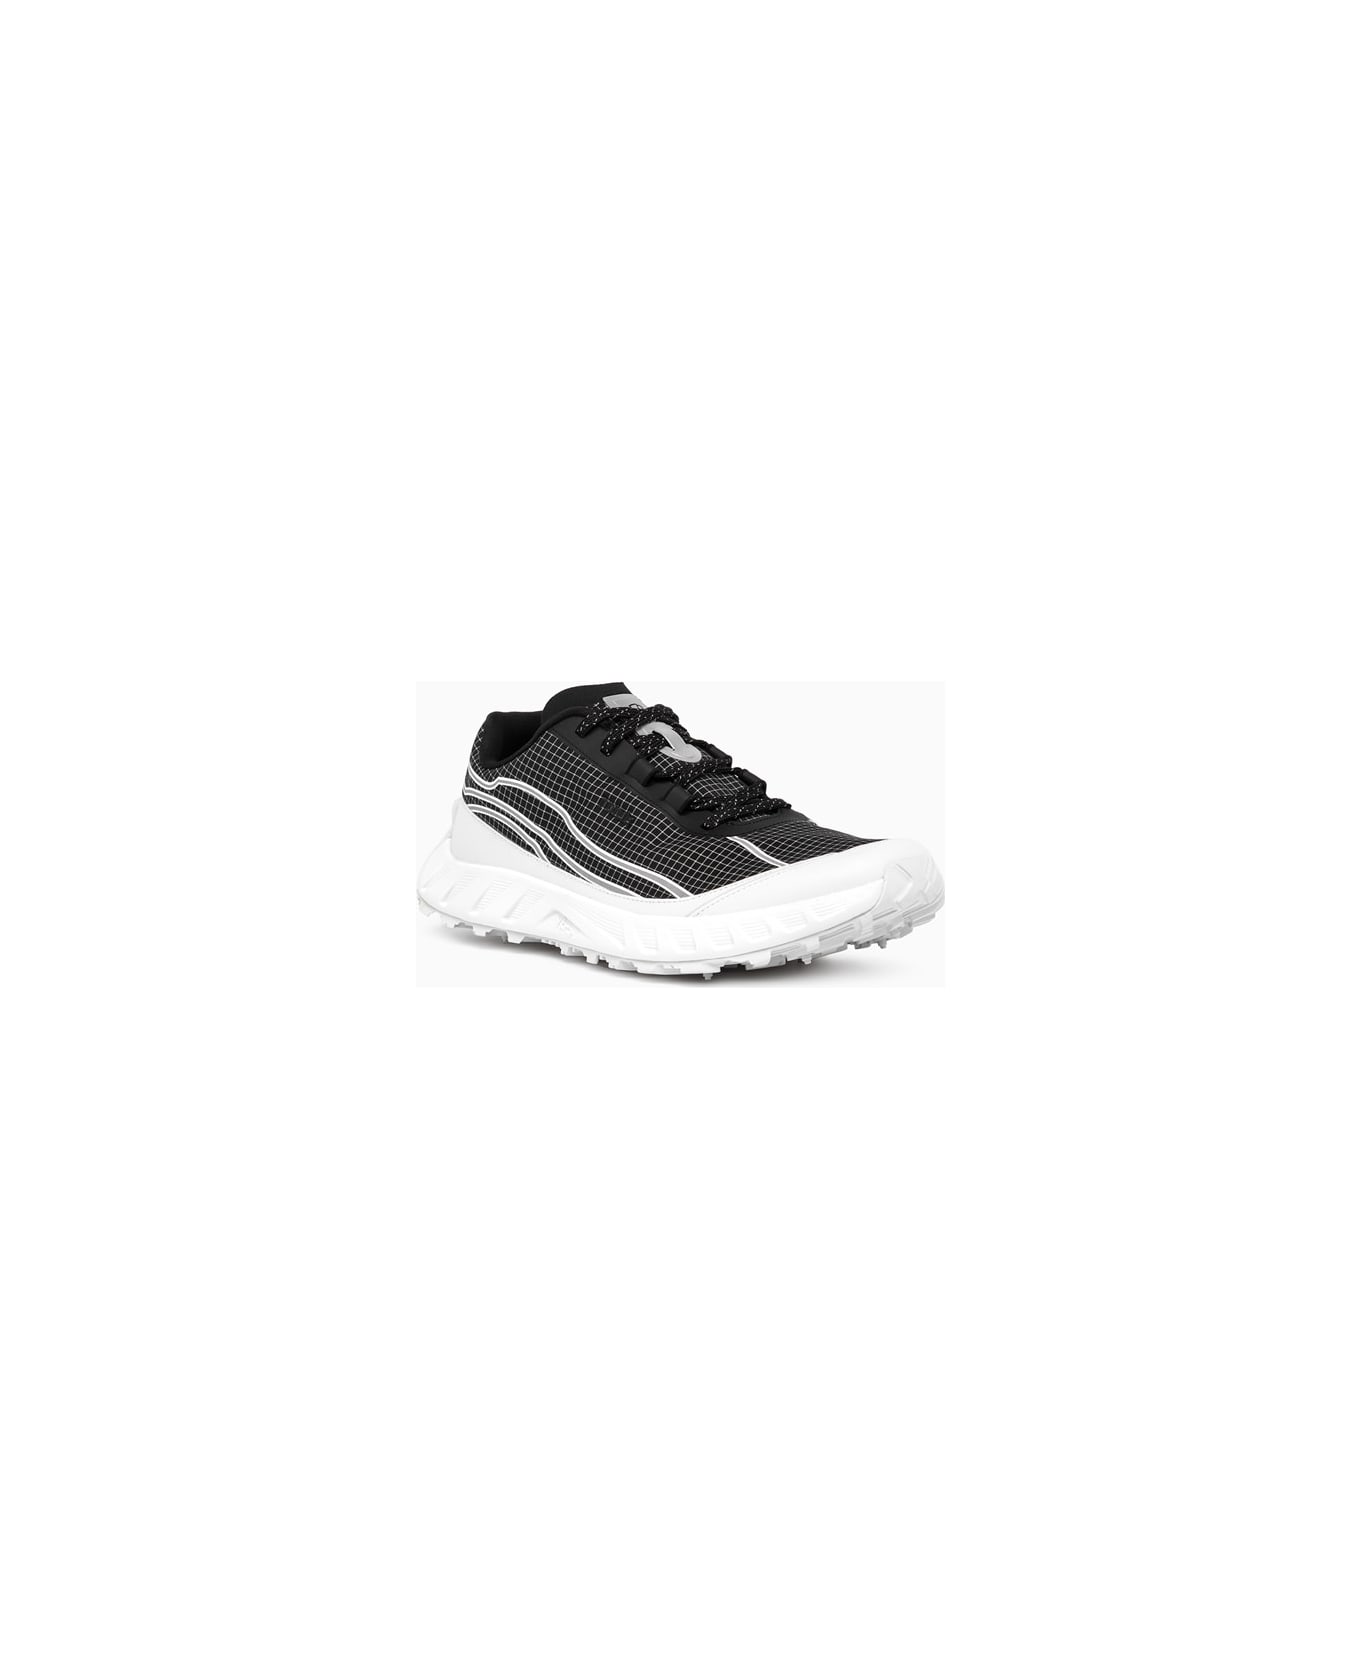 Norda The 002 Blk/ripstop 1019 Sneakers - BLACK/WHITE